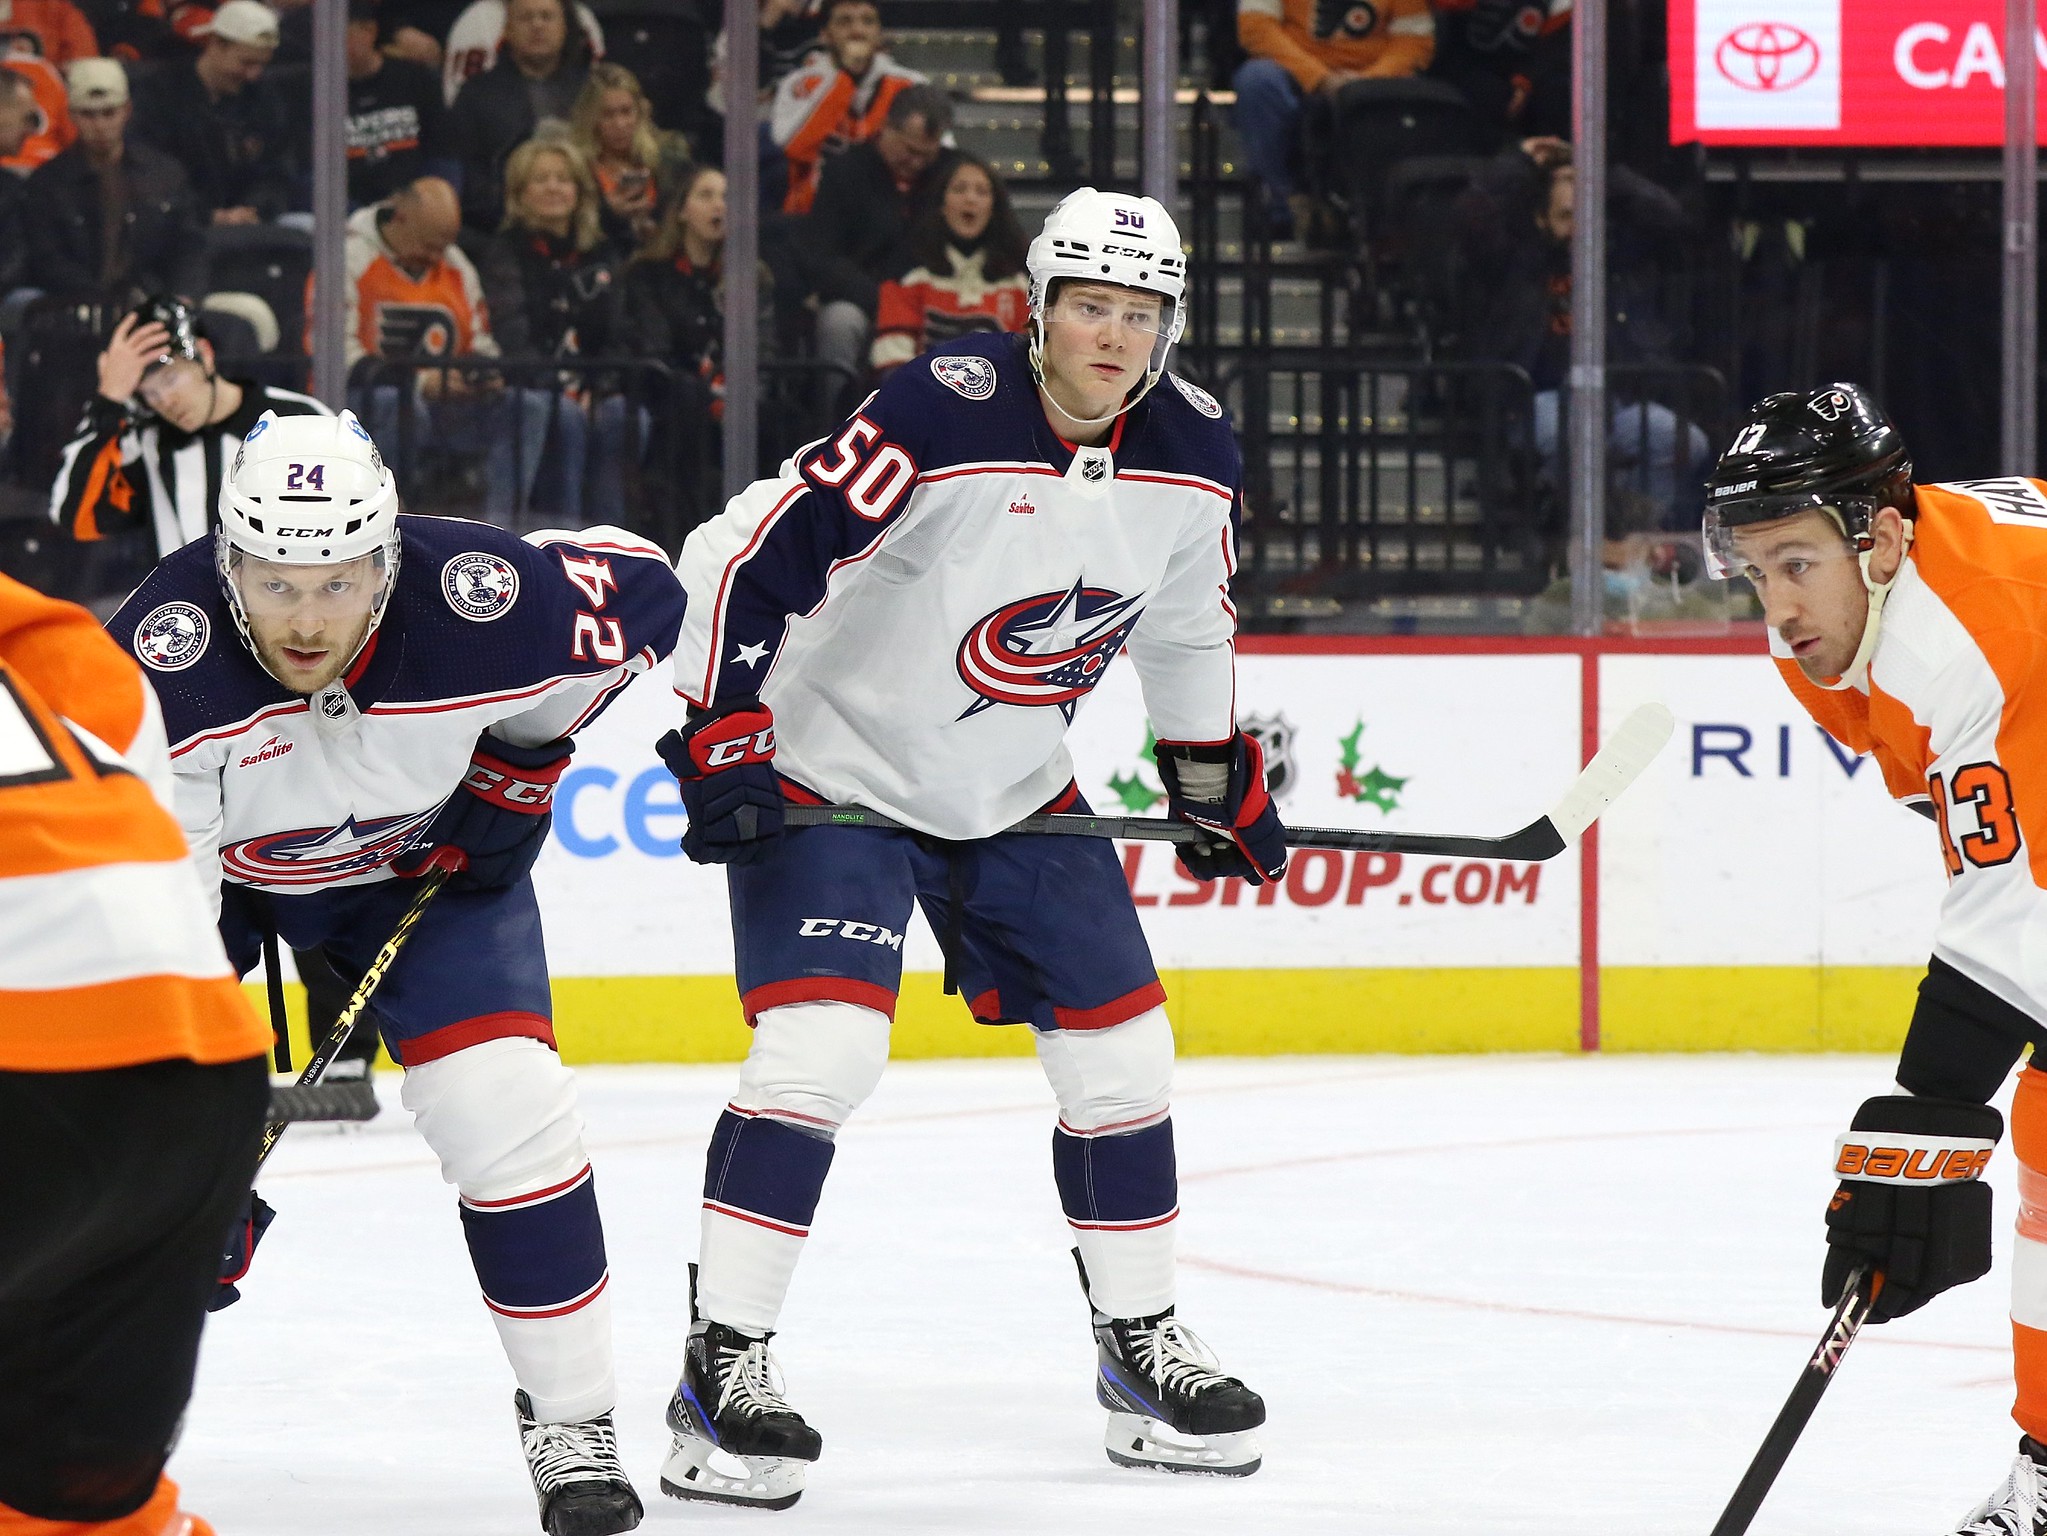 Blue Jackets captain Boone Jenner week to week with back injury